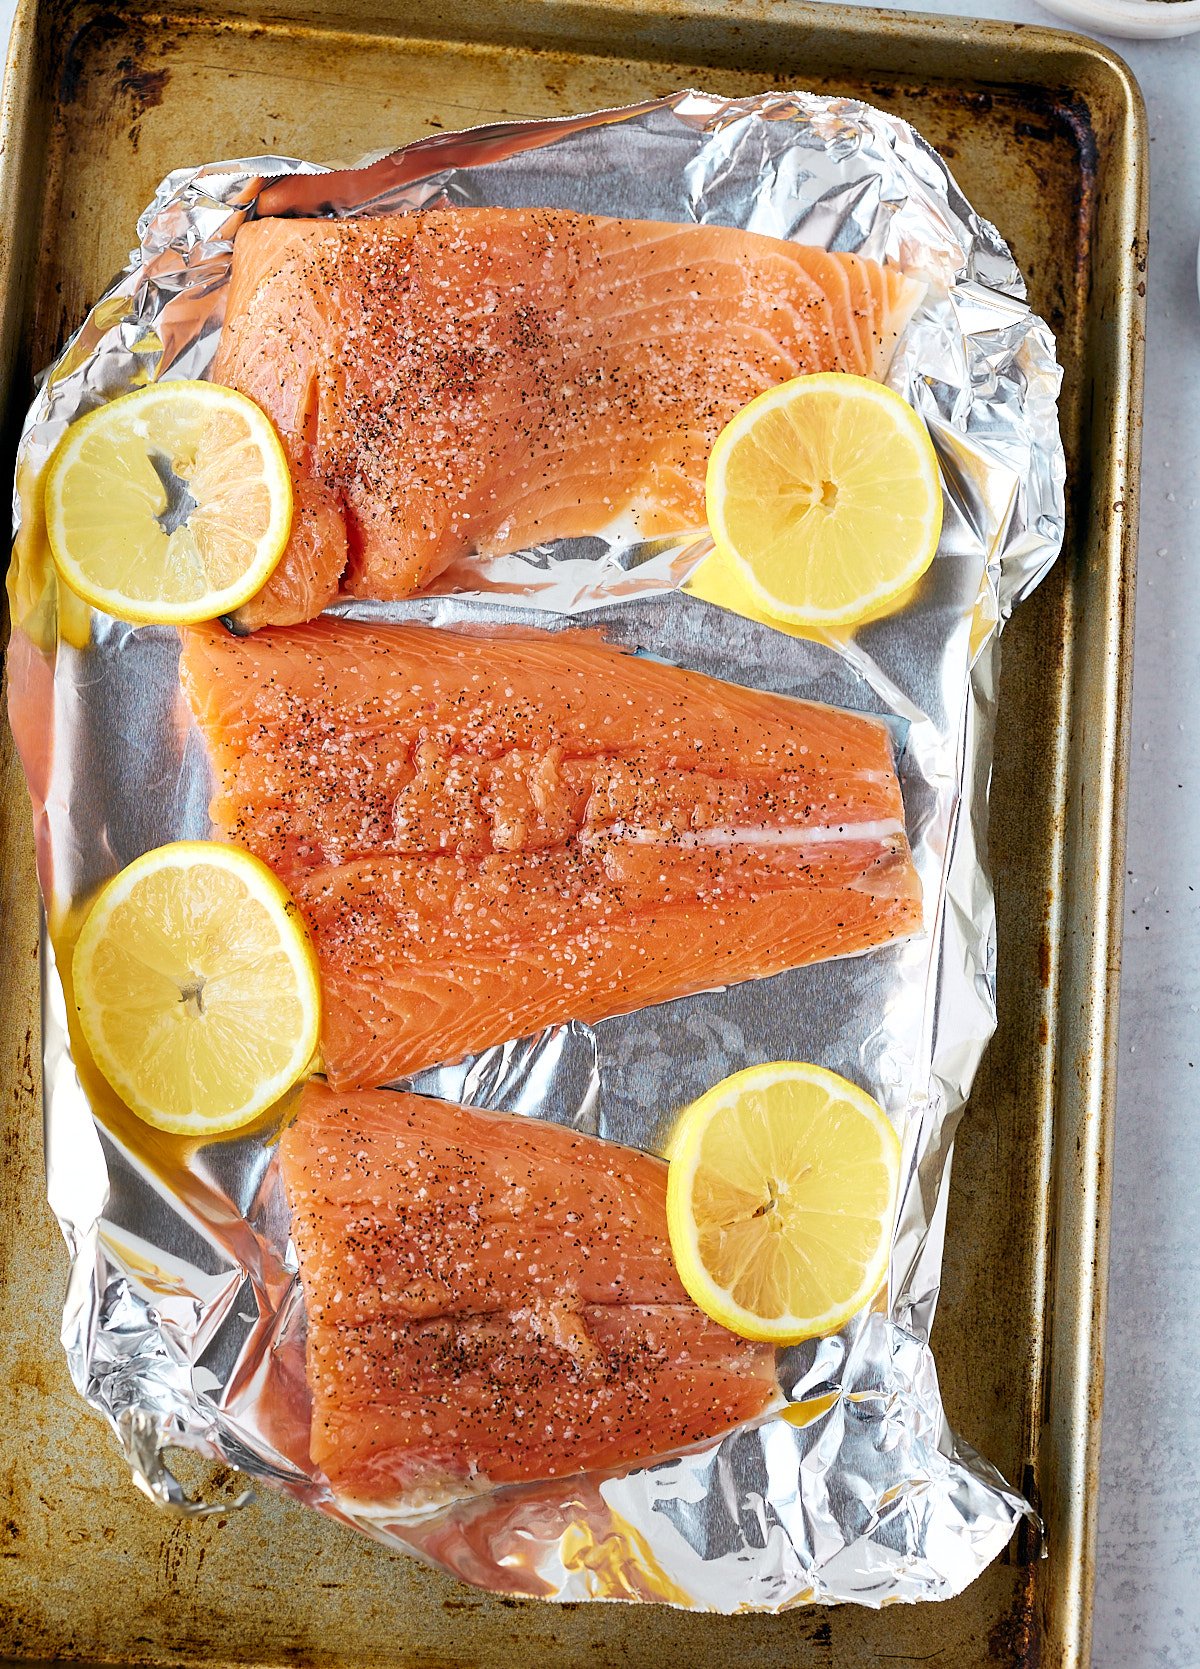 Salmon fillets on a lined baking sheet with slices of lemon.